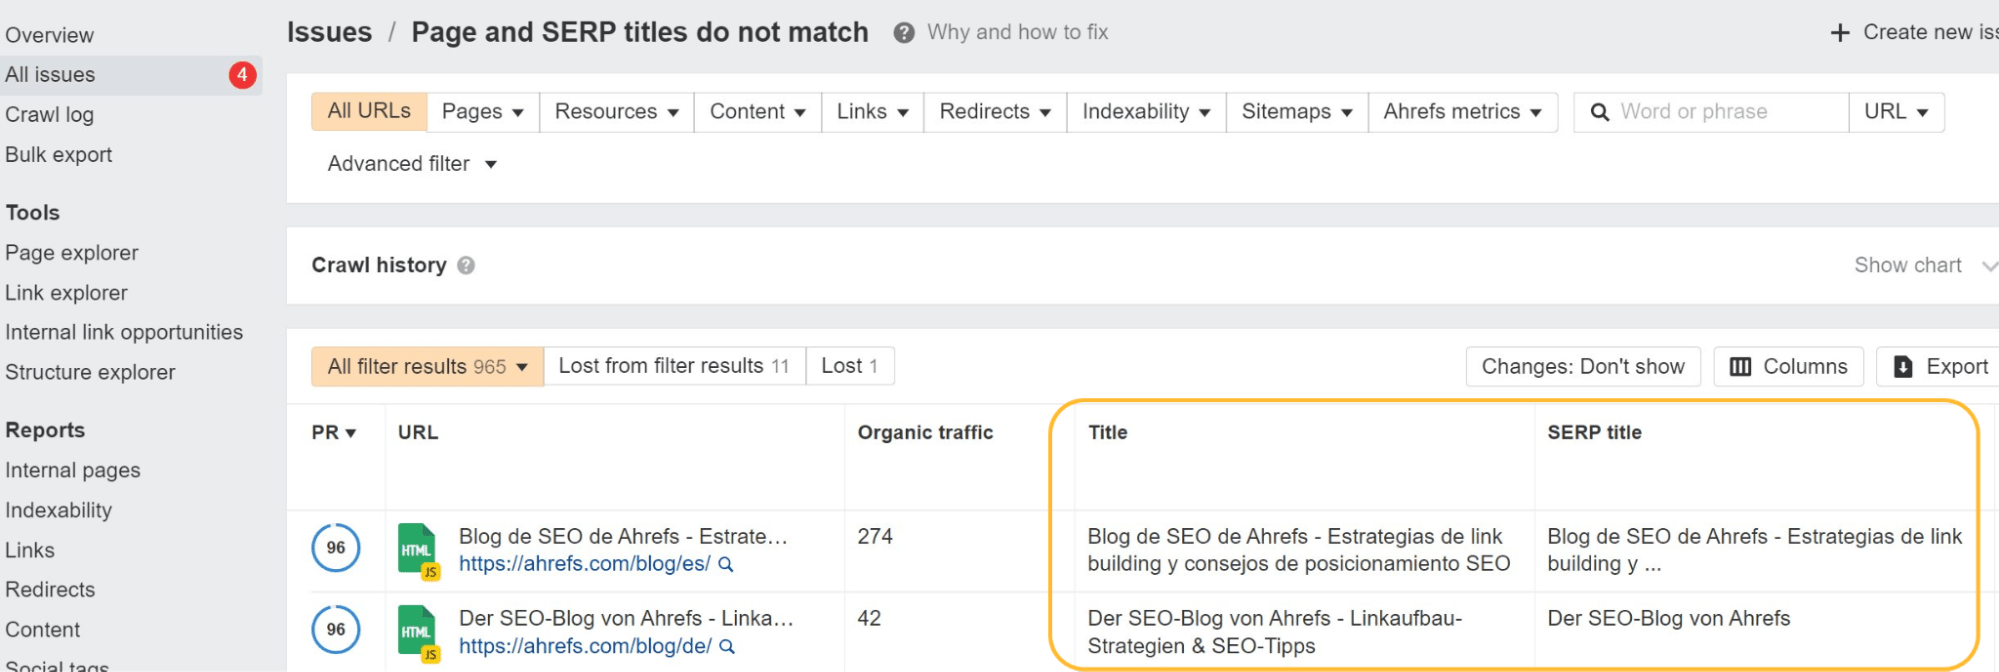 "Page and SERP titles do not match" issue in Ahrefs' Site Audit